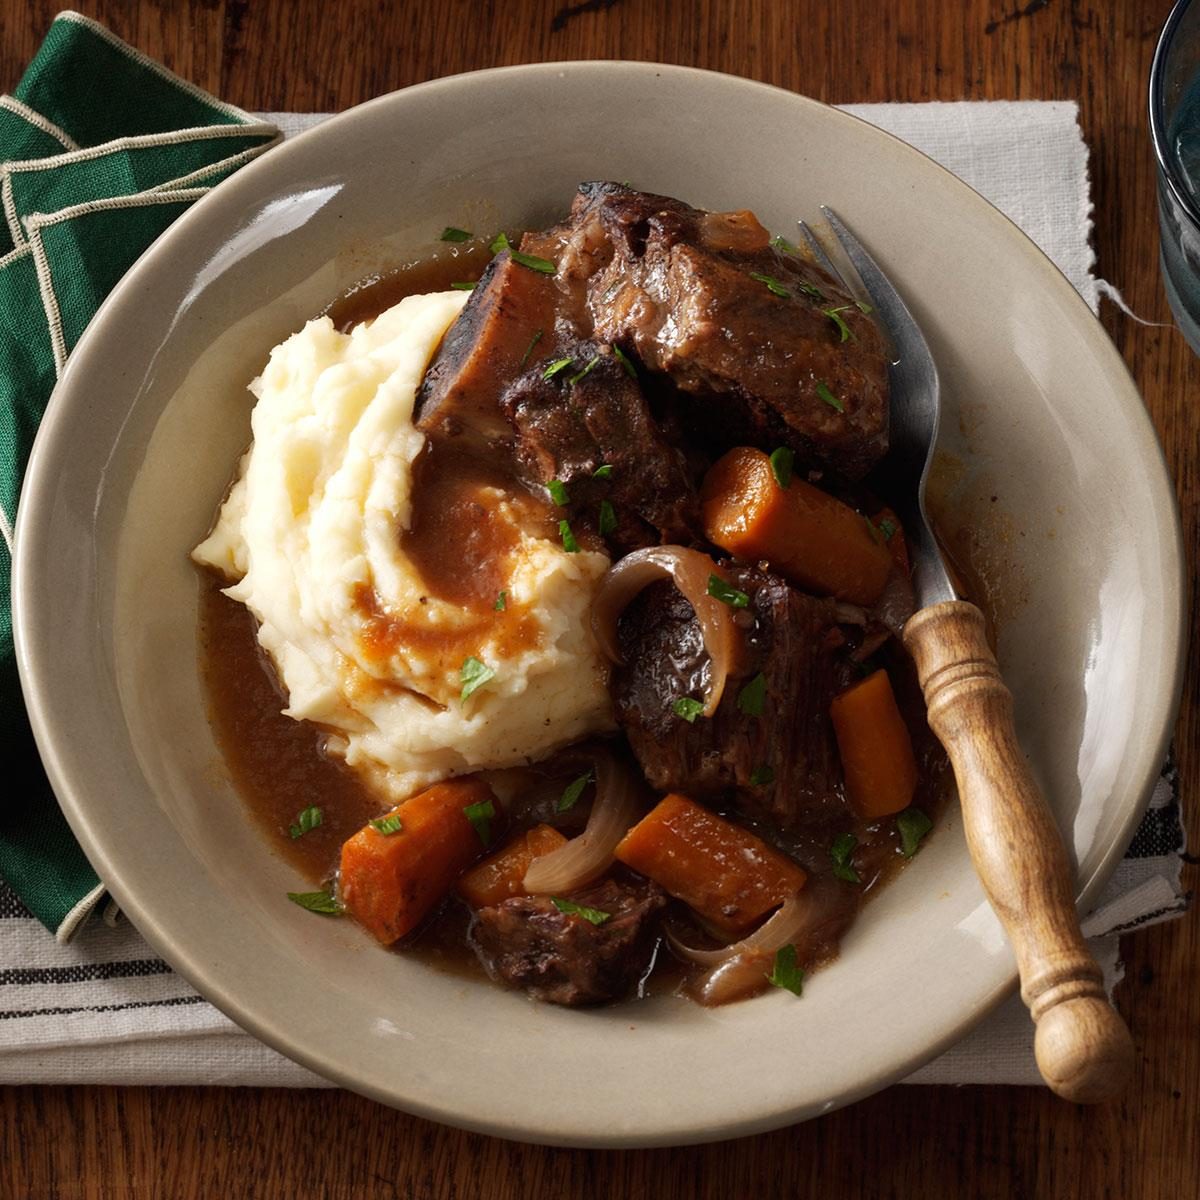 https://www.tasteofhome.com/wp-content/uploads/2018/01/Slow-Cooker-Short-Ribs_exps74925_TH143190C09_25_2bC_RMS-6.jpg?fit=700%2C1024